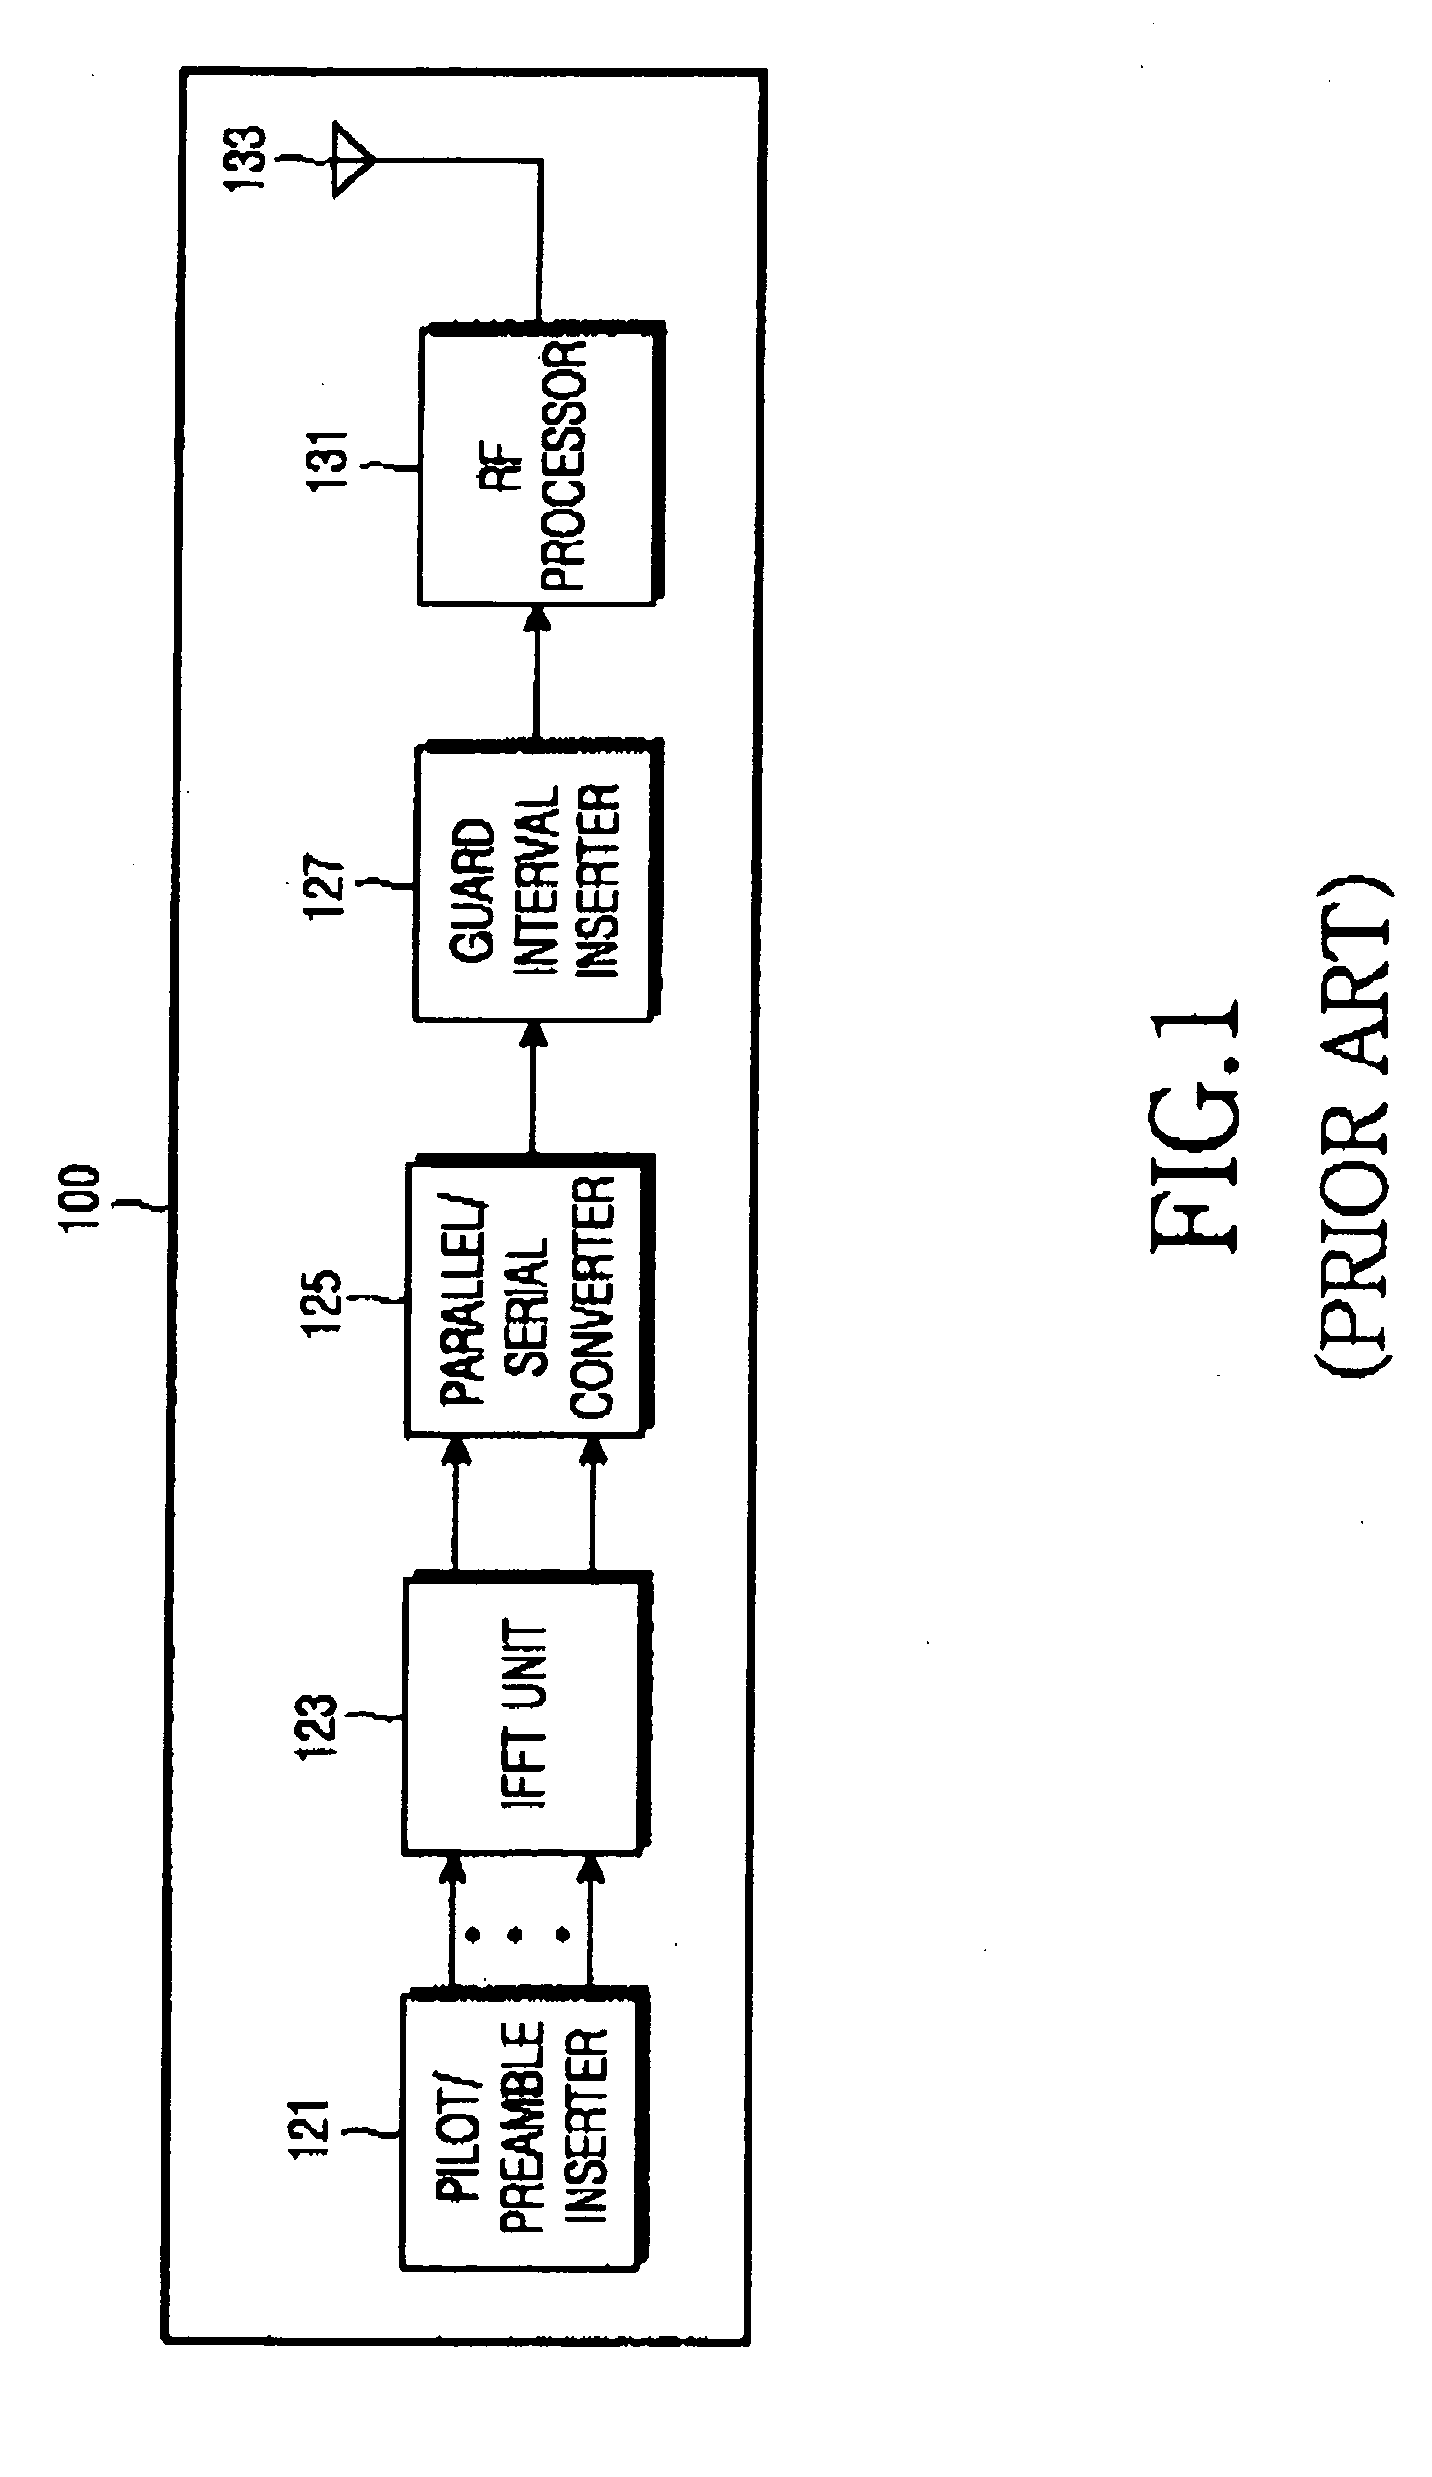 Apparatus and method for estimating a carrier to interference and noise ratio in a communication system